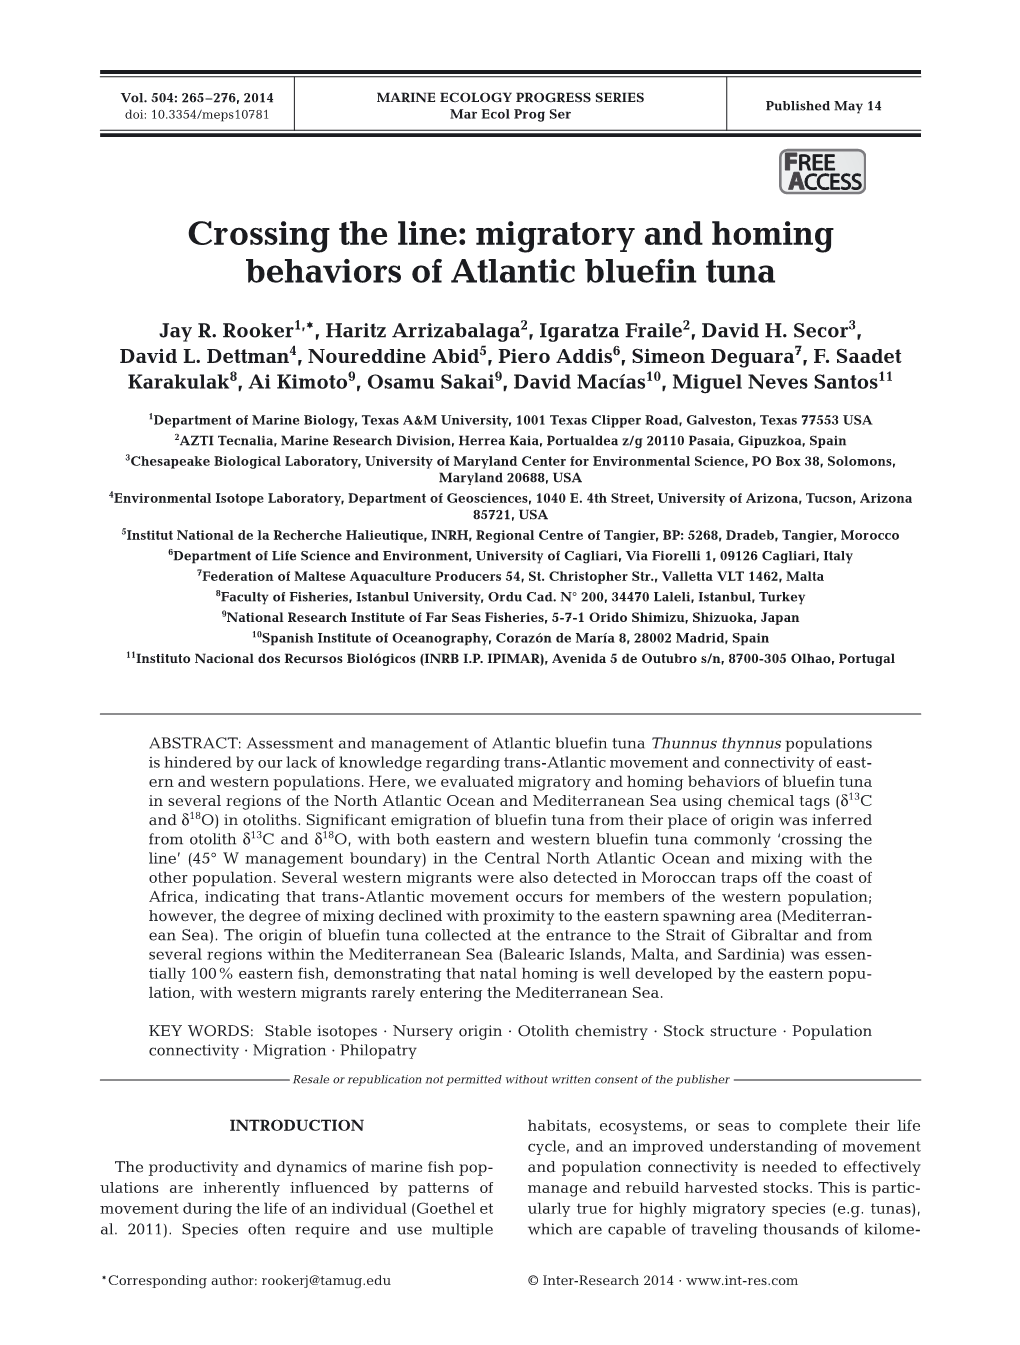 Crossing the Line: Migratory and Homing Behaviors of Atlantic Bluefin Tuna